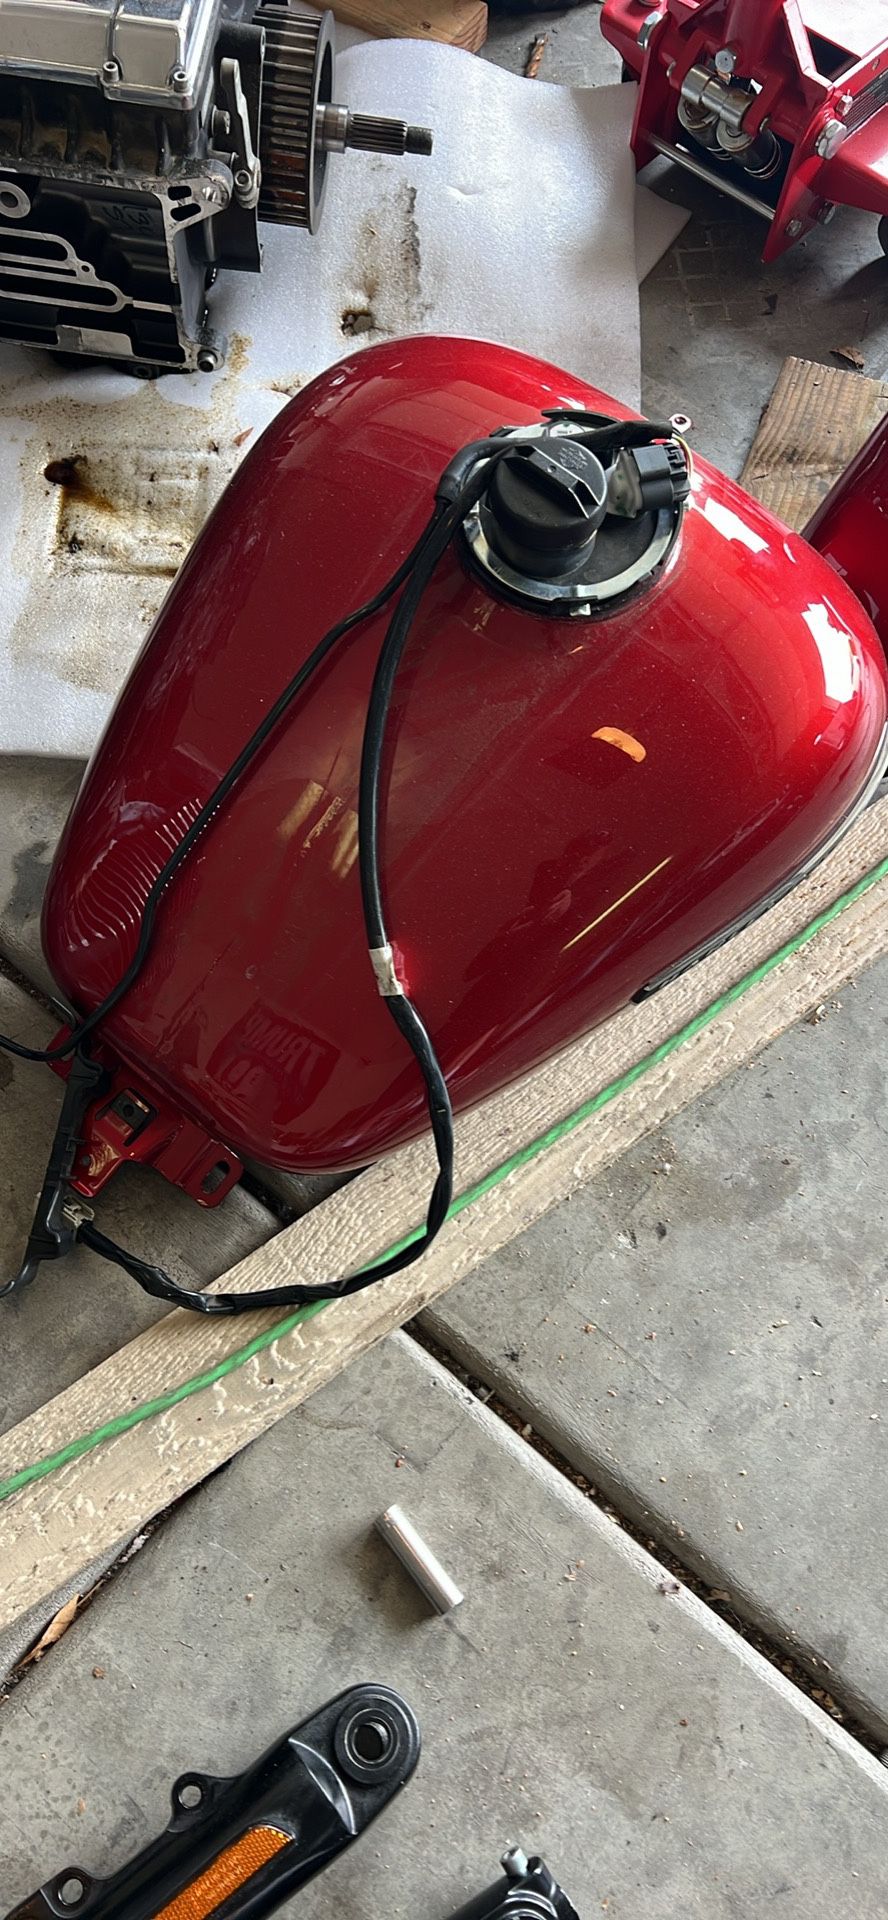 Harley 6 Gal Tank With Pump And 15 Up Rg Headlight 